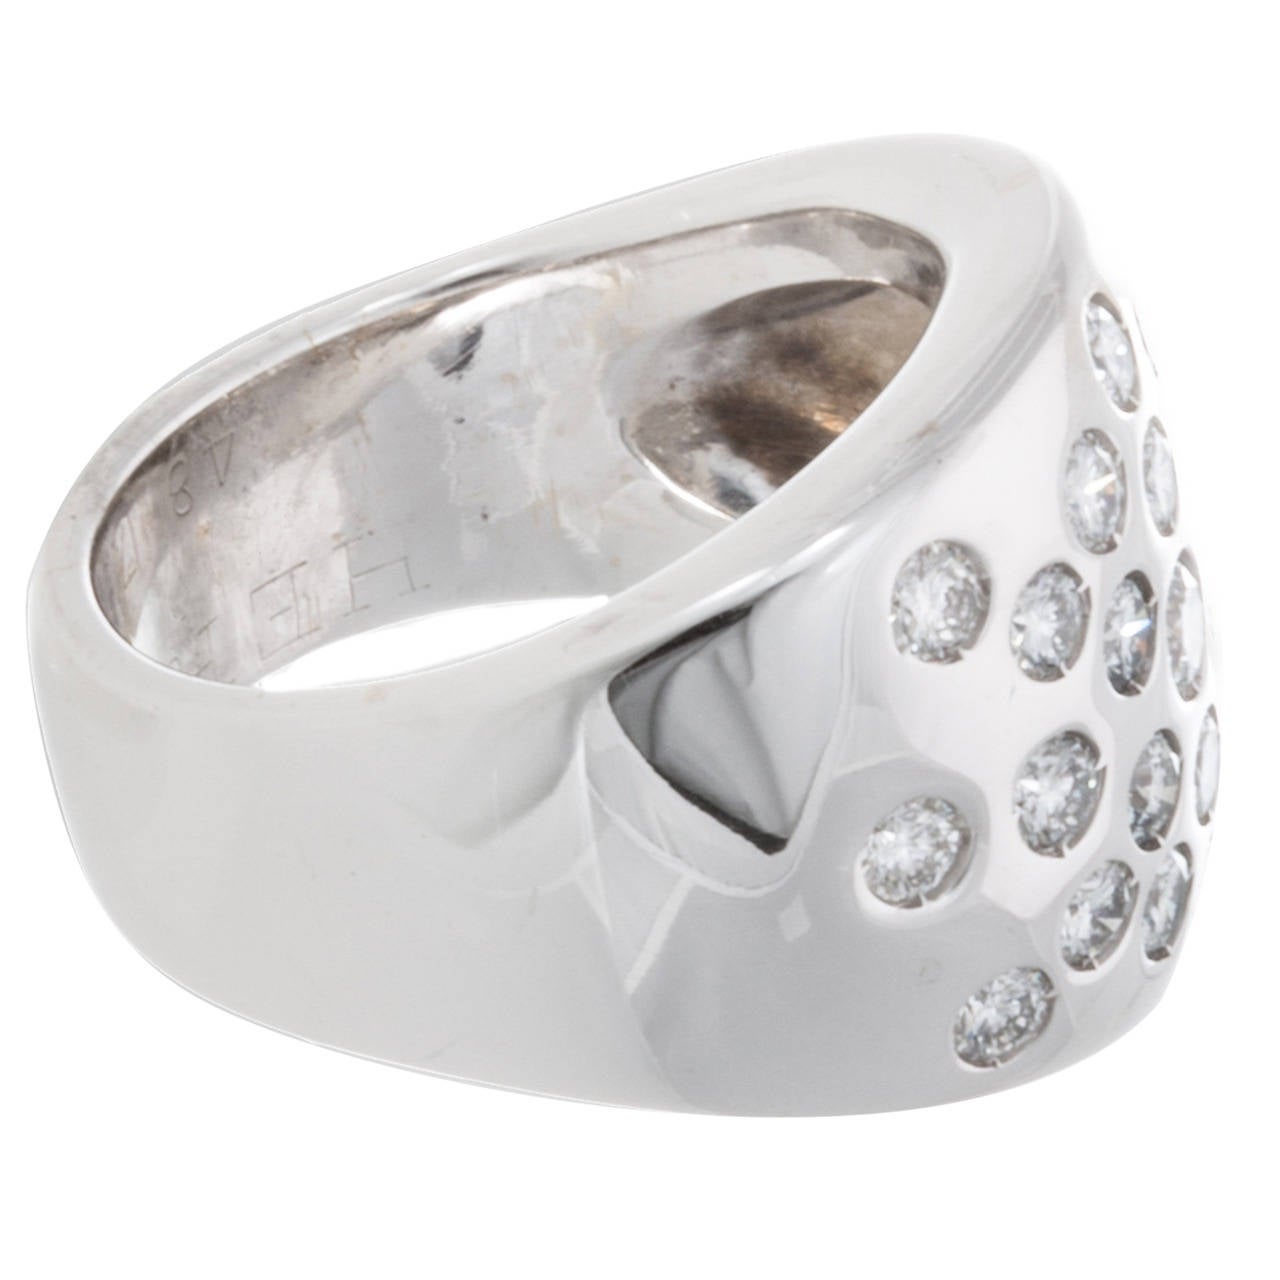 Hermes Diamond Ring in 18K White Gold. Total Diamond Weight .95ct, Ring Weight 11.7g, Ring Size US 4.25 / EUR 48, Stamped: 